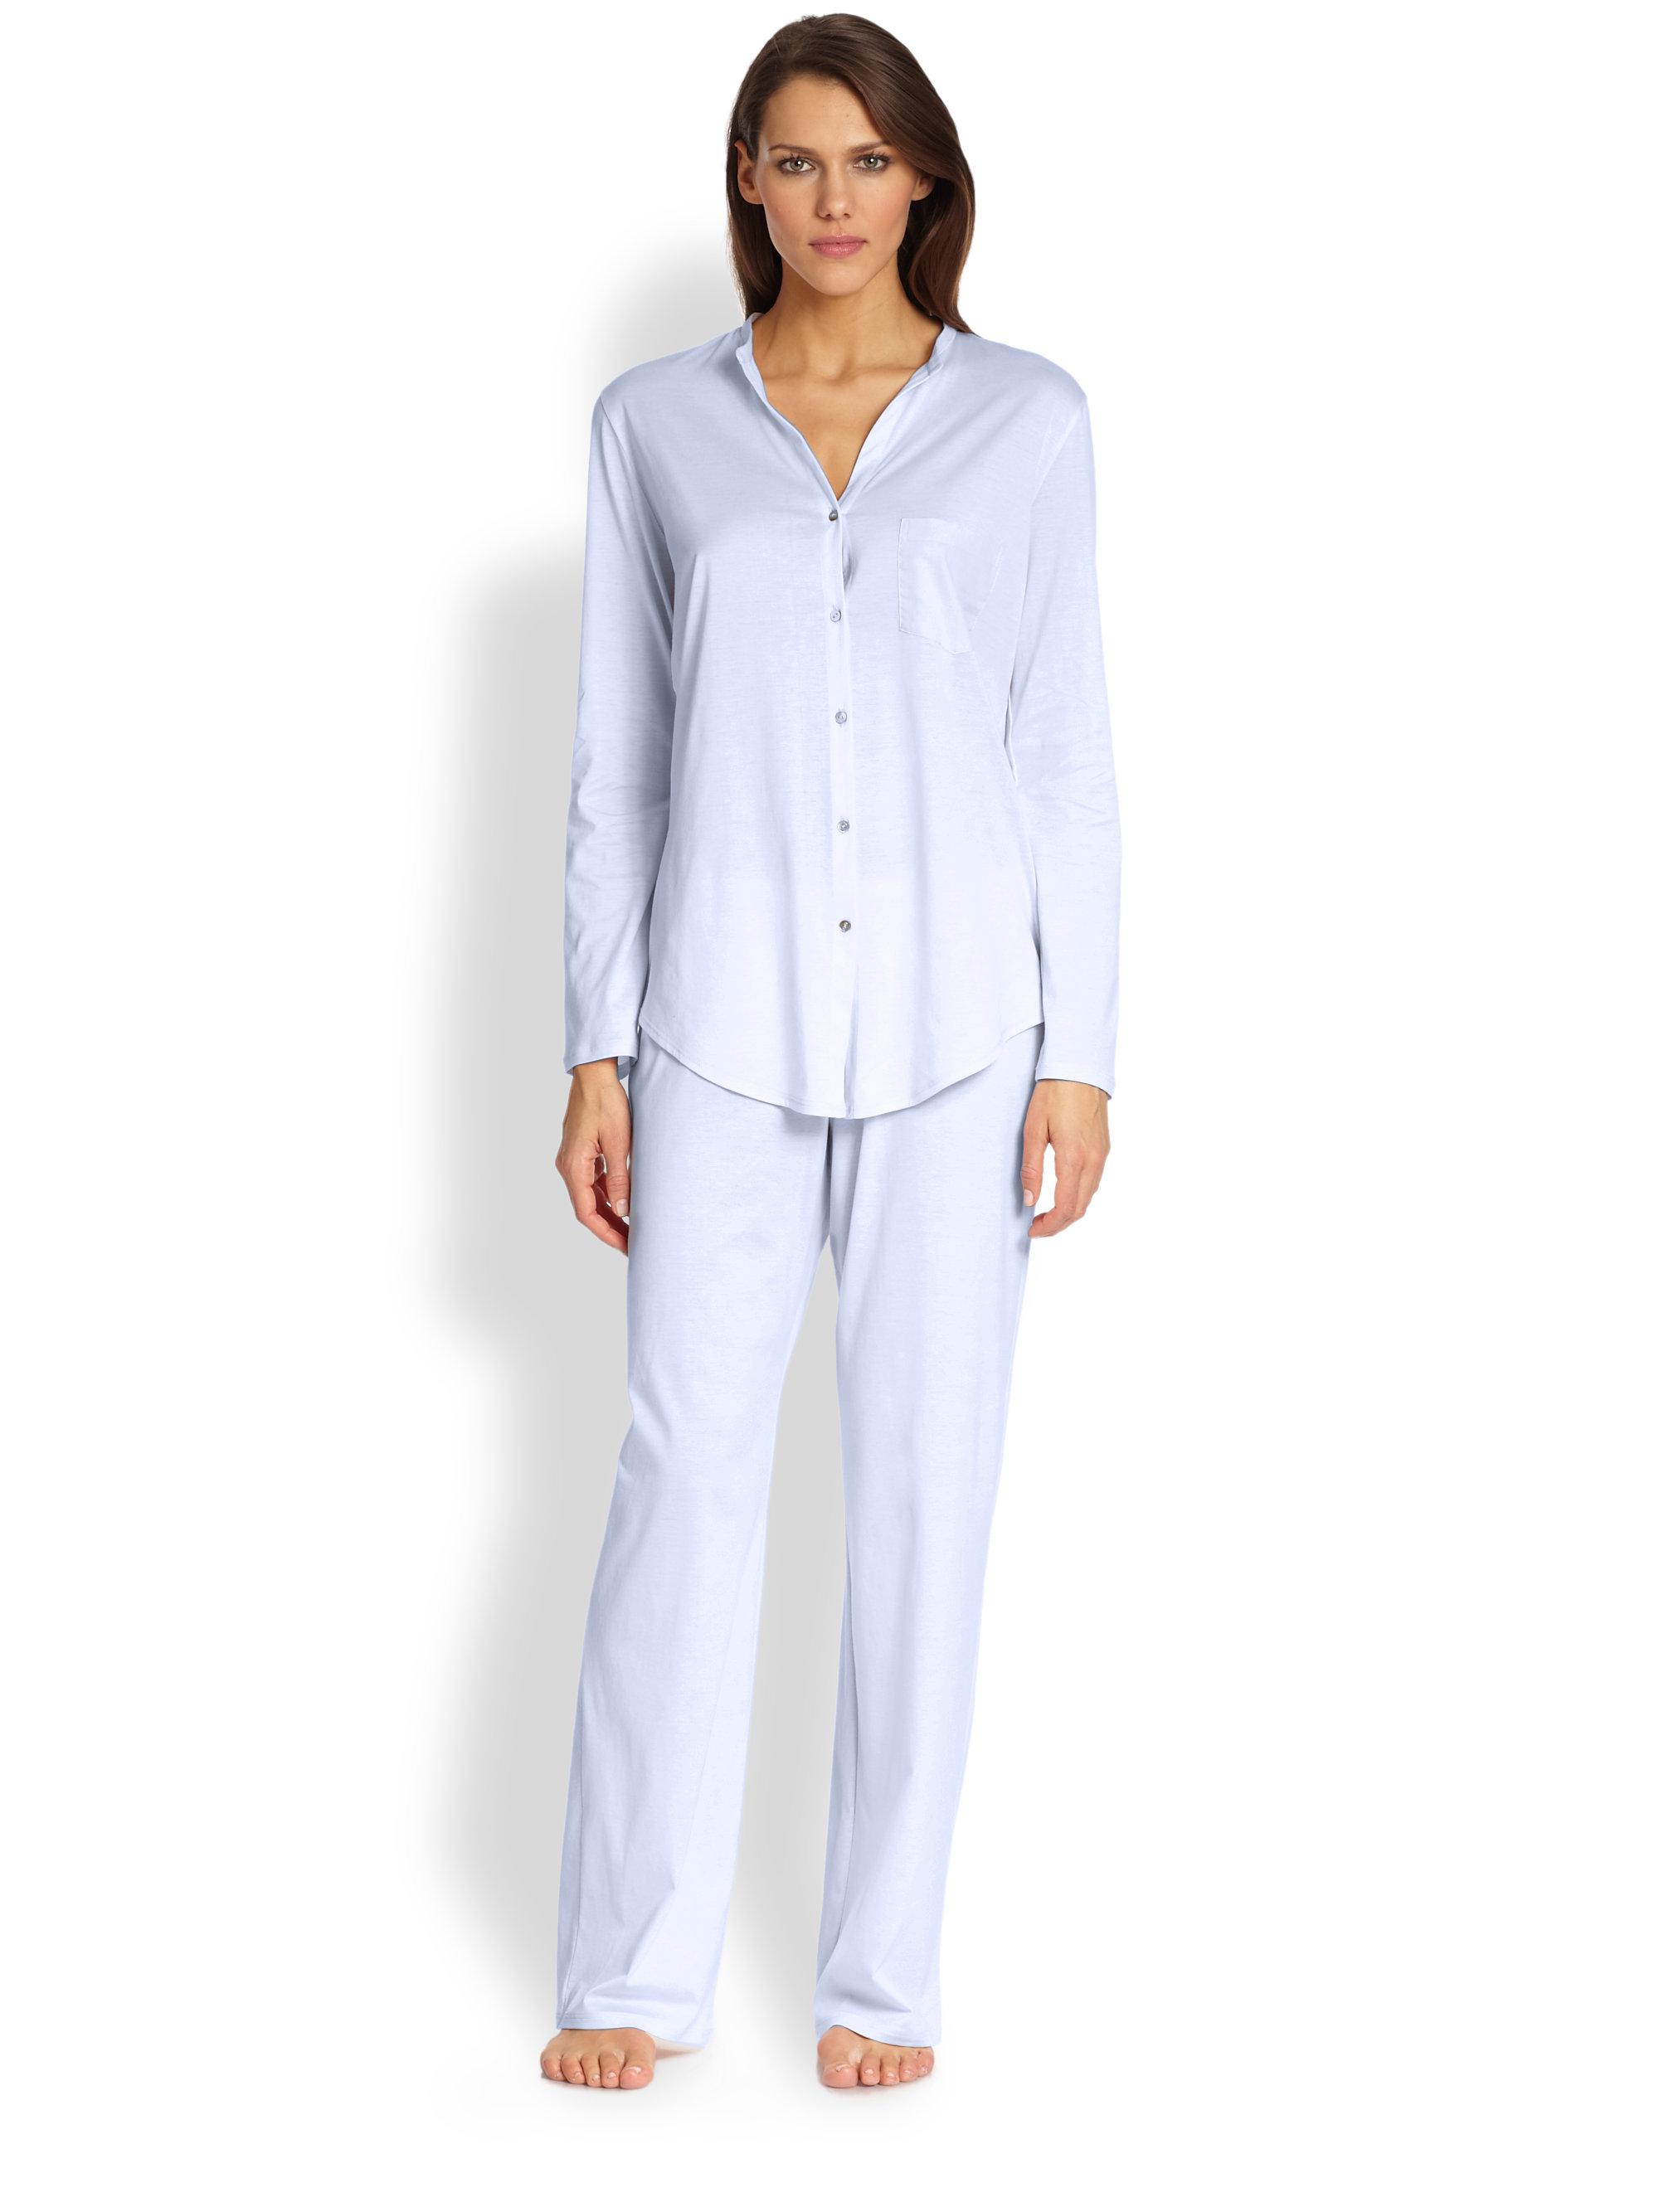 Lyst - Hanro Long Sleeve Button-front Pajamas in Blue